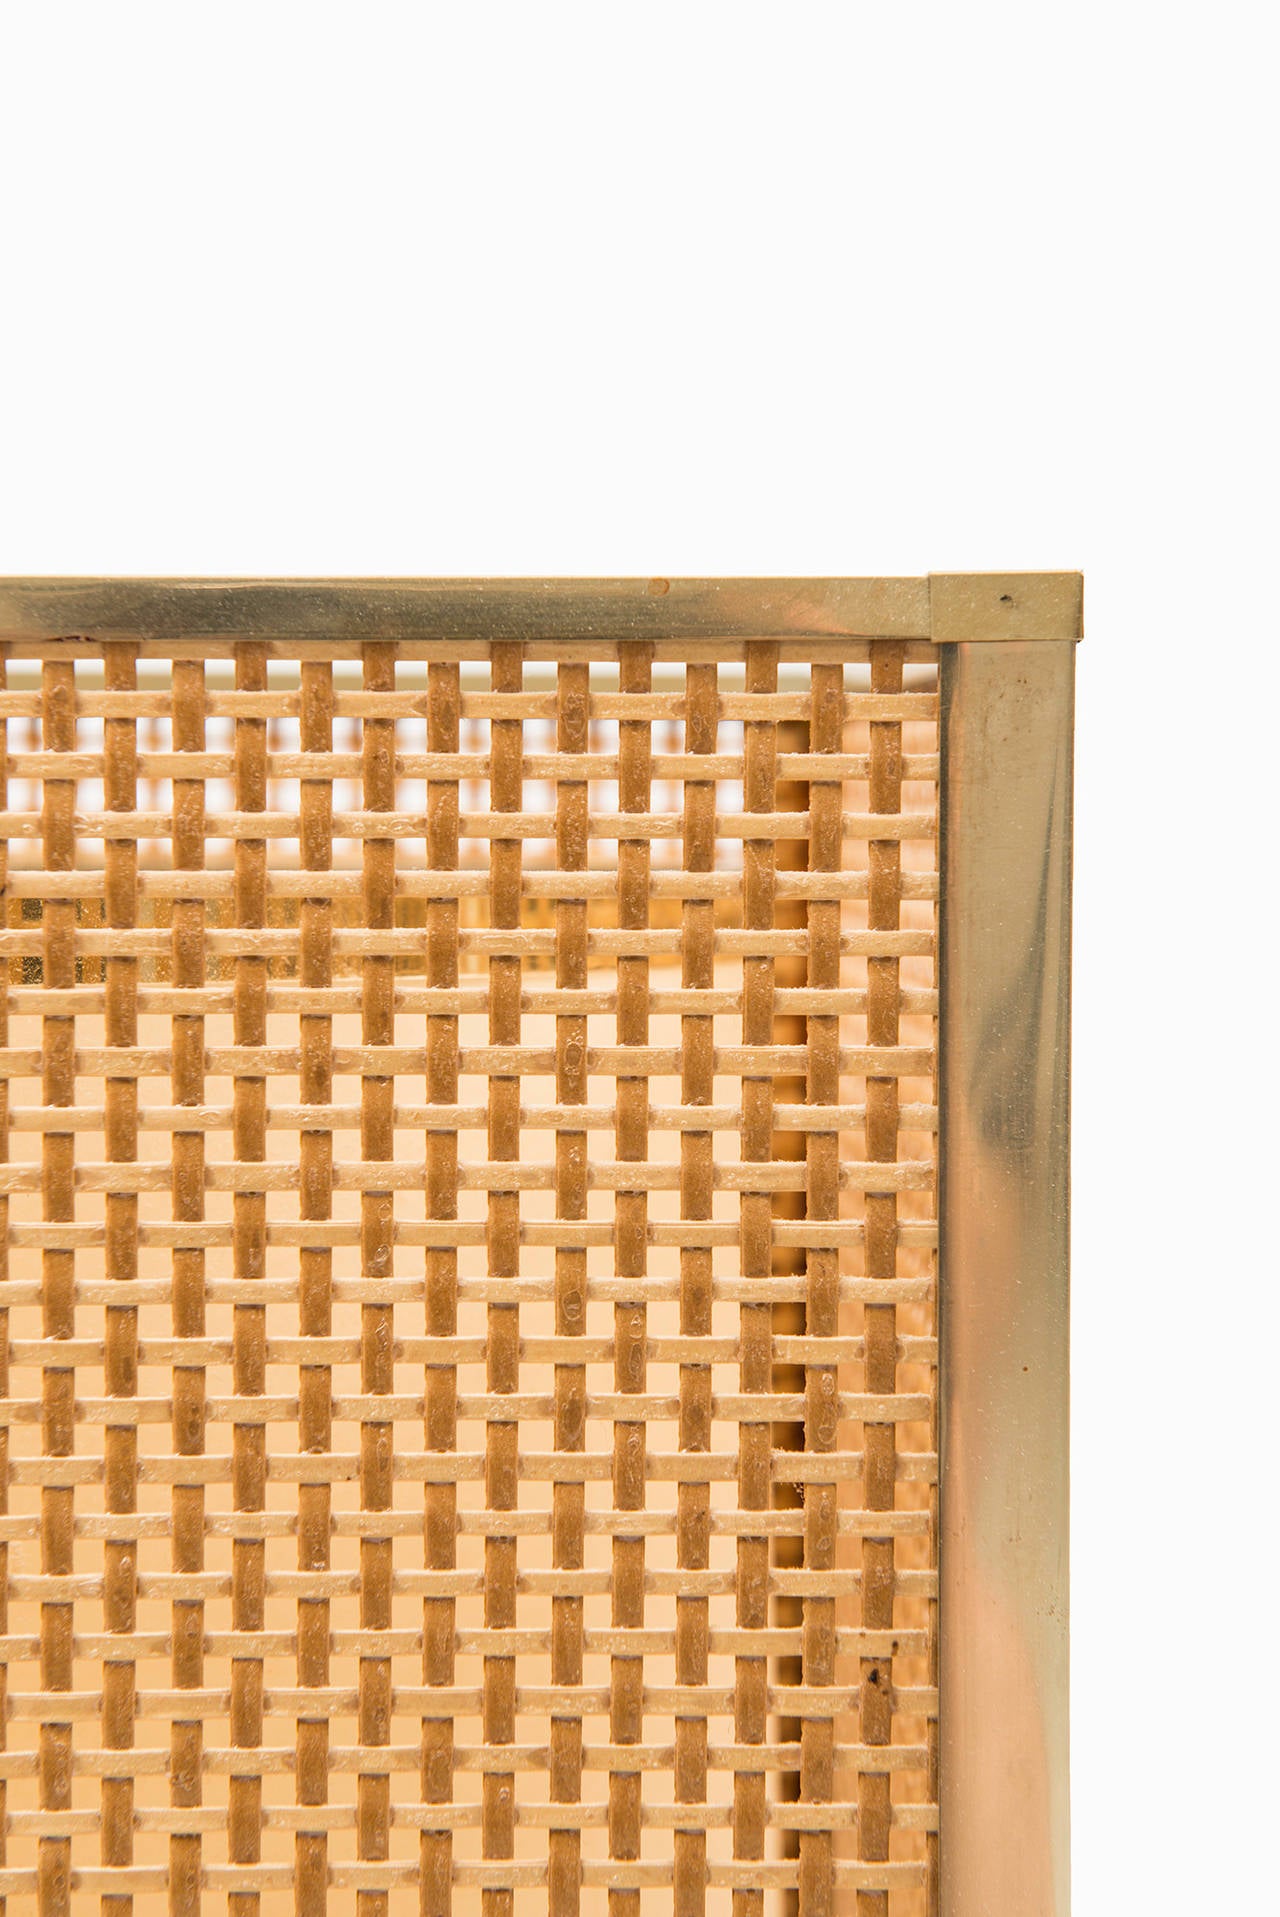 Rare Fili Mannelli table lamp in travertine, woven cane and brass. Produced in Italy.